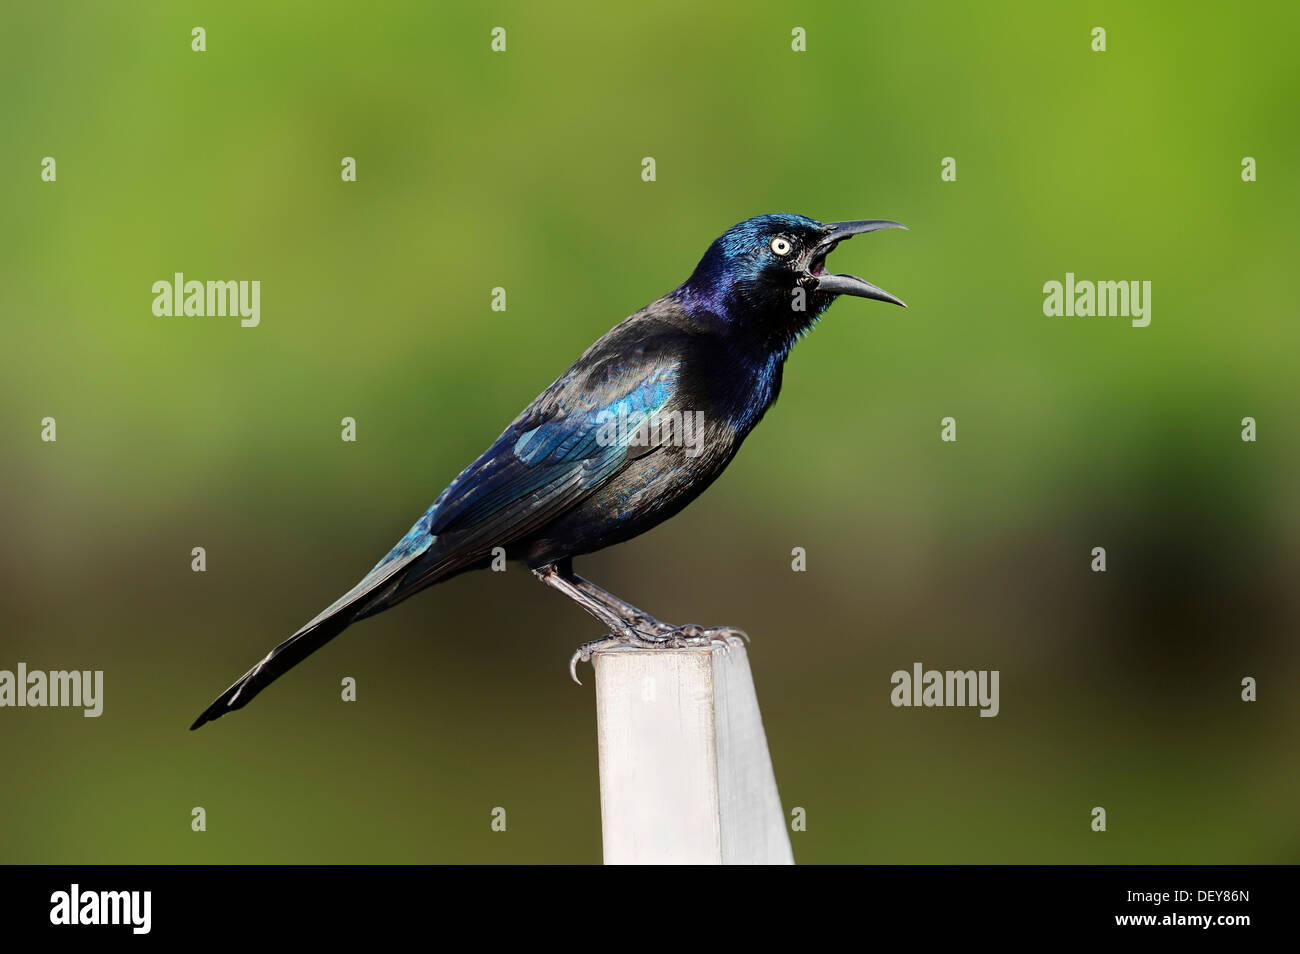 Common Grackle (Quiscalus quiscula), male singing, Everglades National Park, Florida, United States Stock Photo